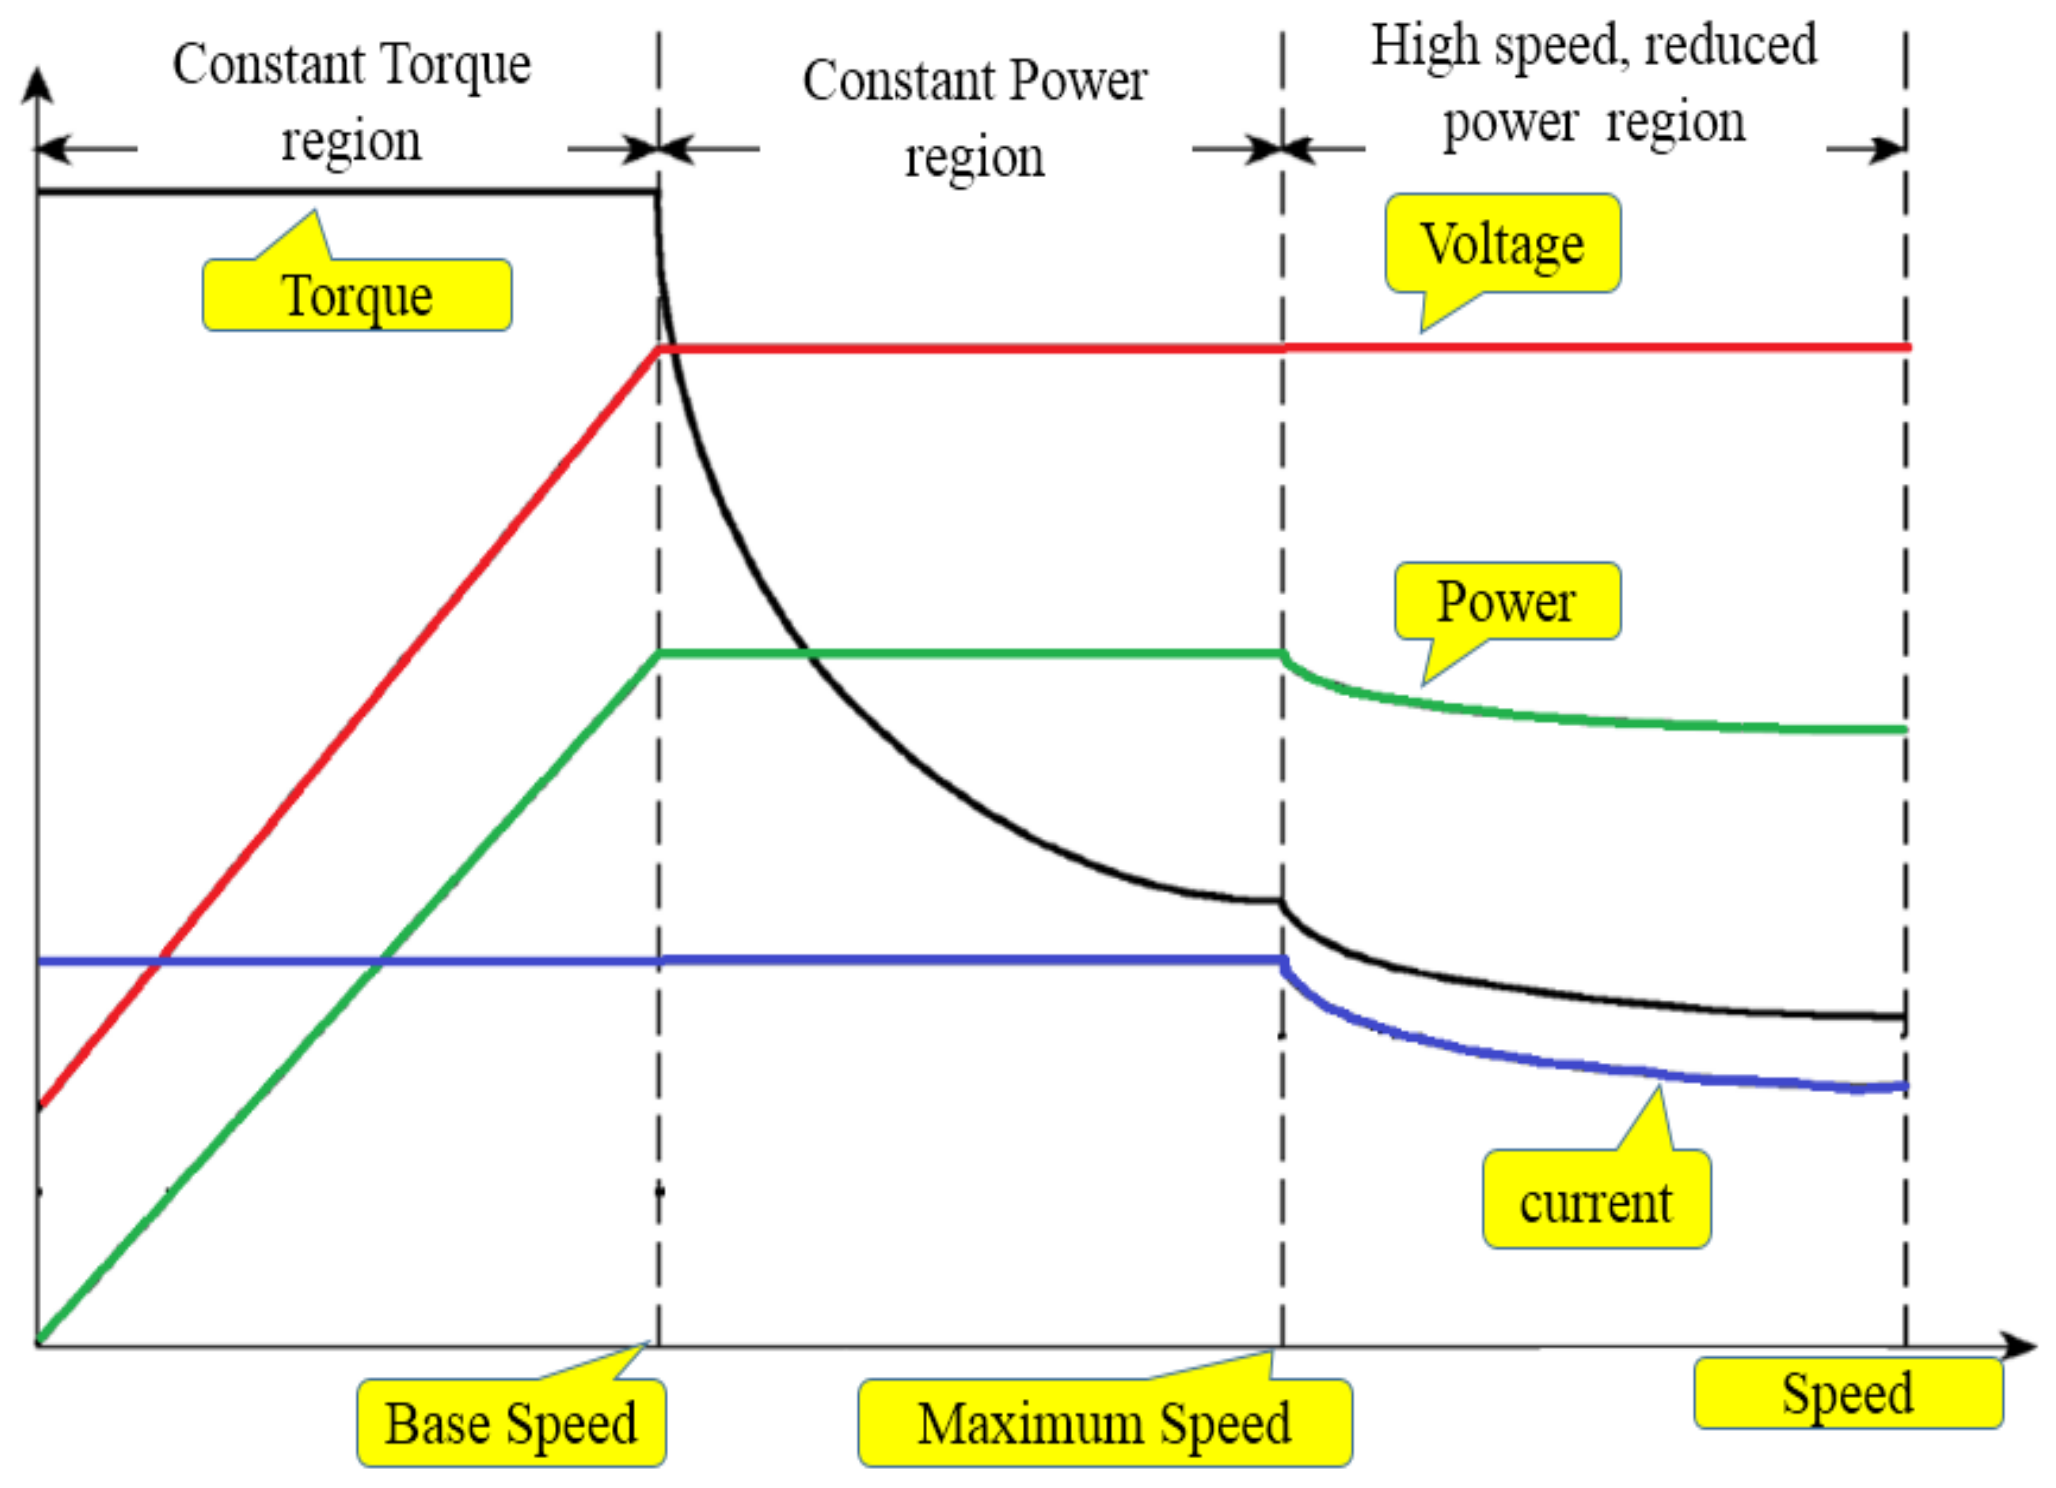 Why should we maintain a constant torque up to rated speeds in a